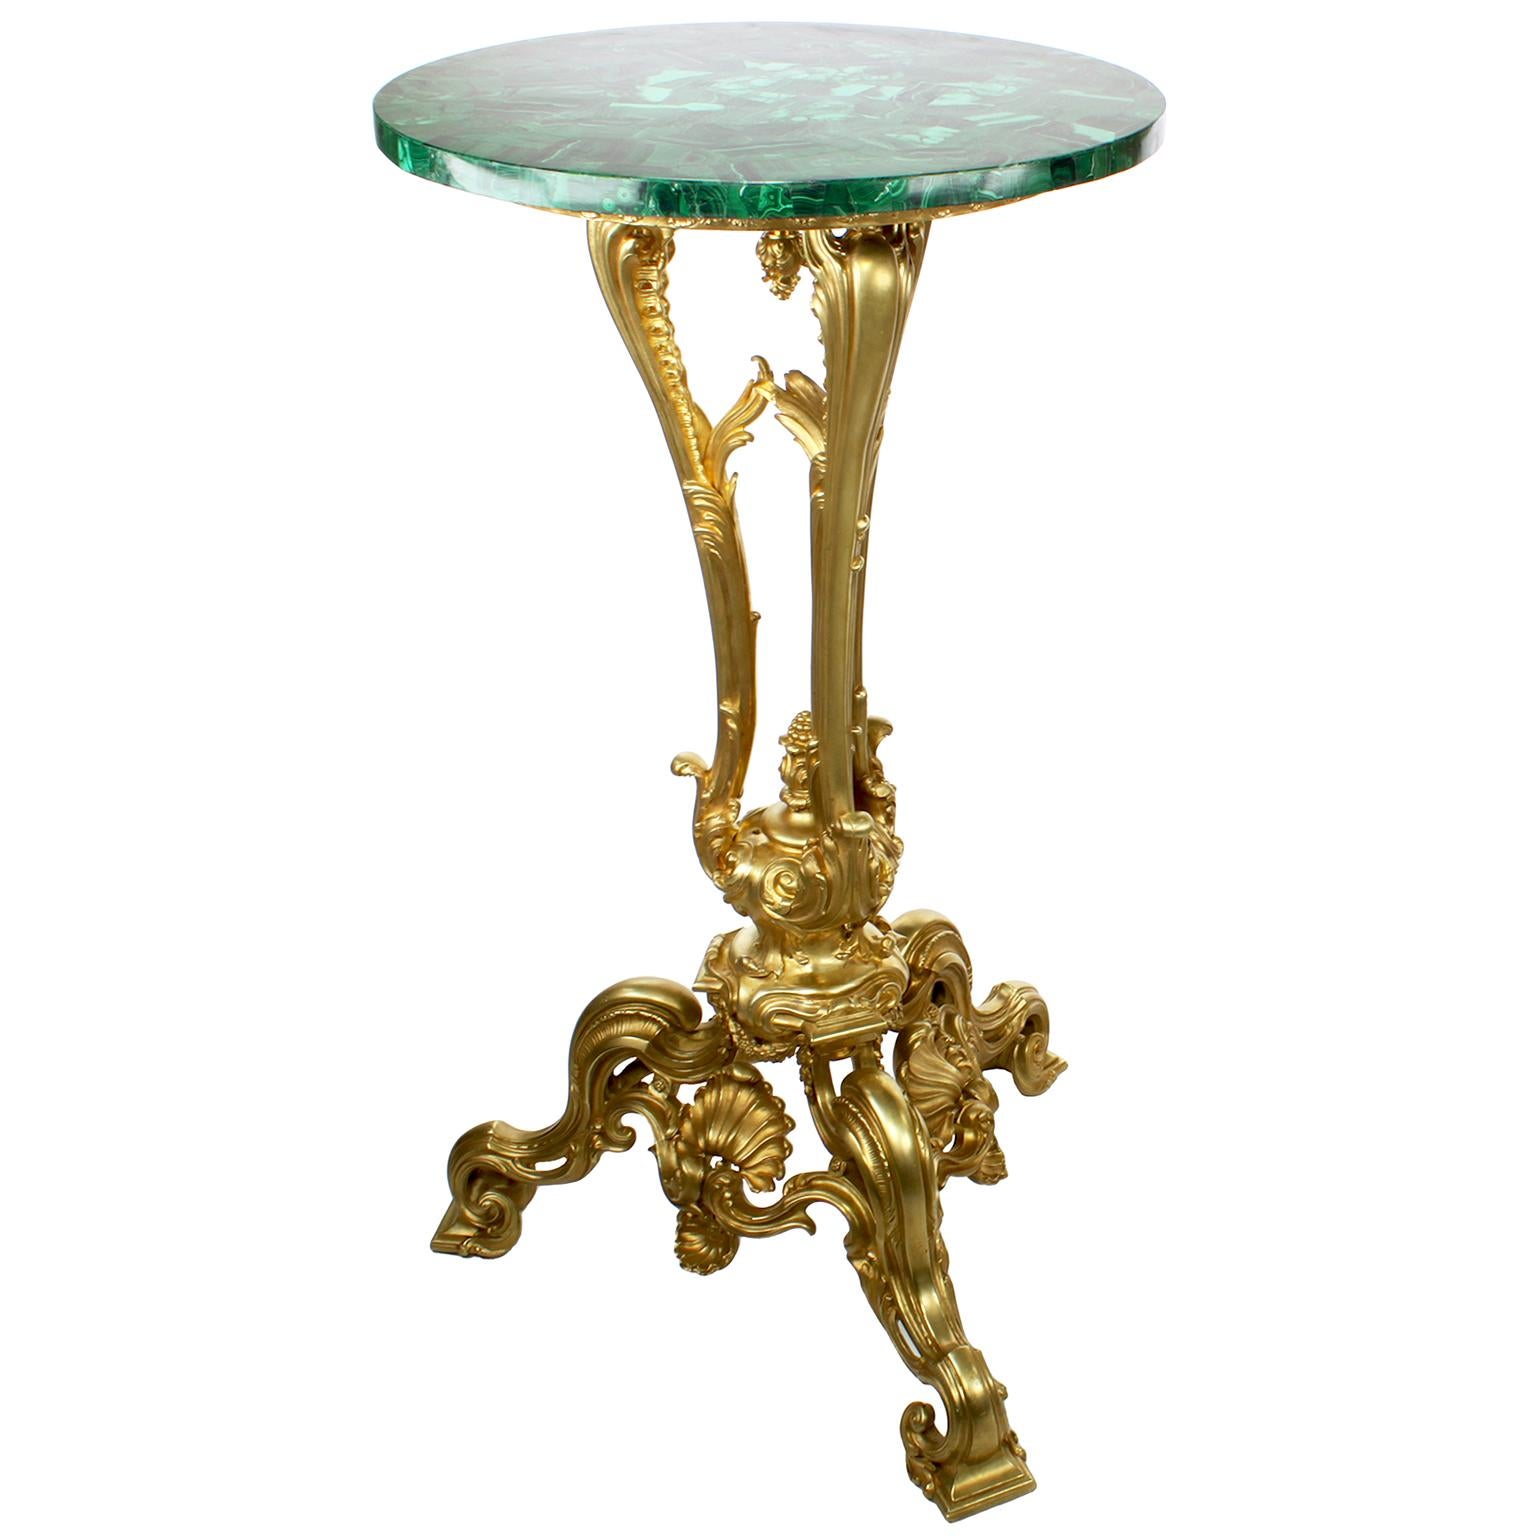 A Palatial very fine and rare pair of French 19th century Louis XV style Ormolu and Malachite Pedestal side tables, attributed to Frédéric-Eugène Piat (French, 1827-1903), the bronze casting by Georges Édouard Gagneau (1842-1909) Gagneau Frères. The